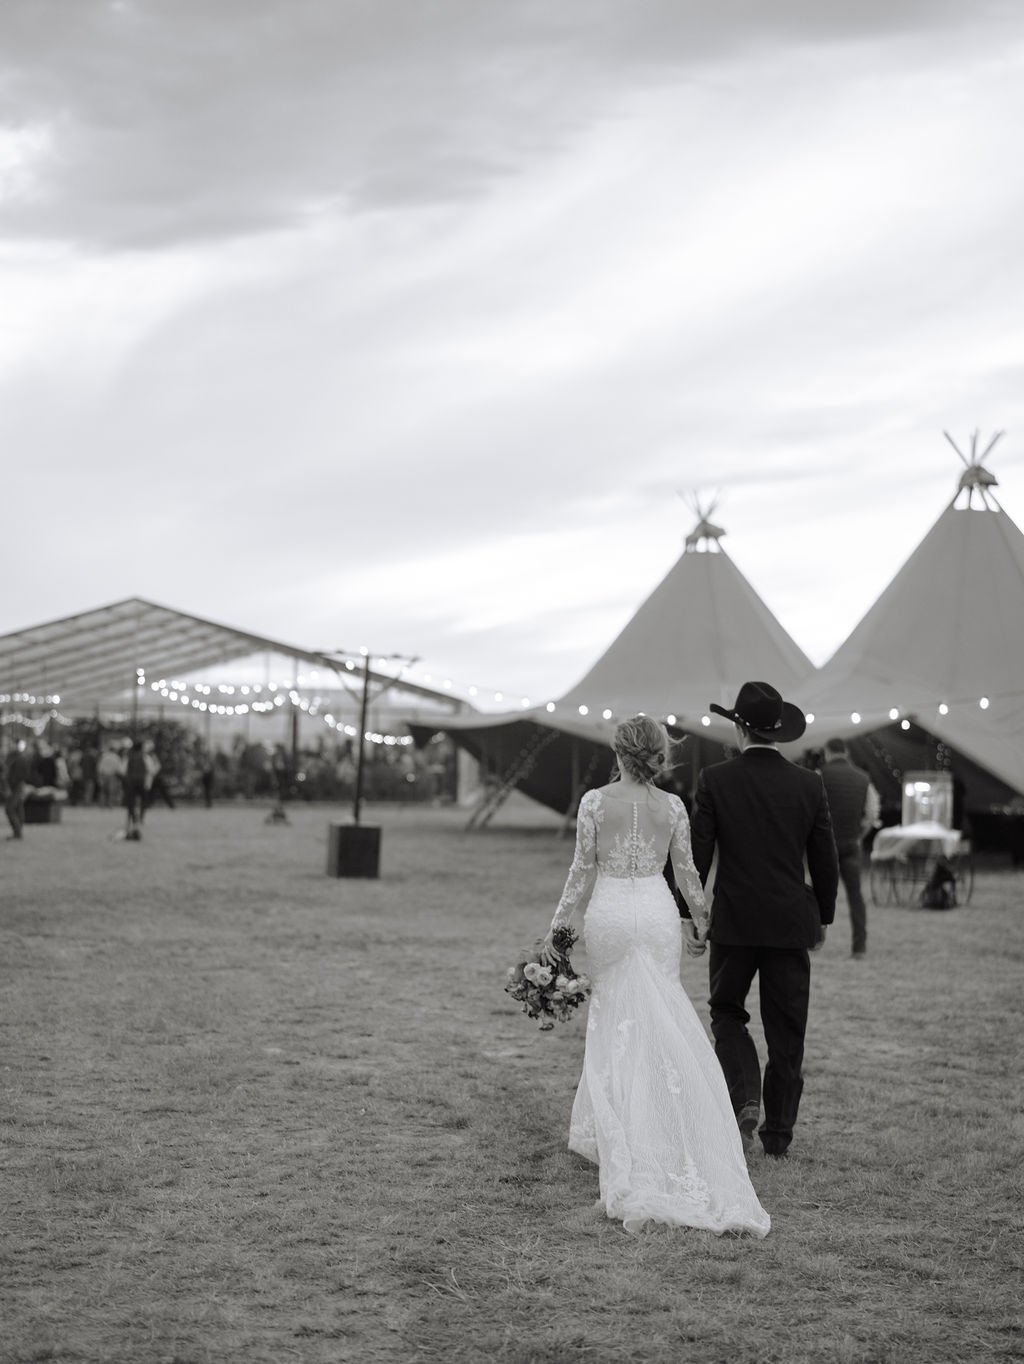 Tee pees at Ranch wedding by Texas wedding planner Shannon Rose Events